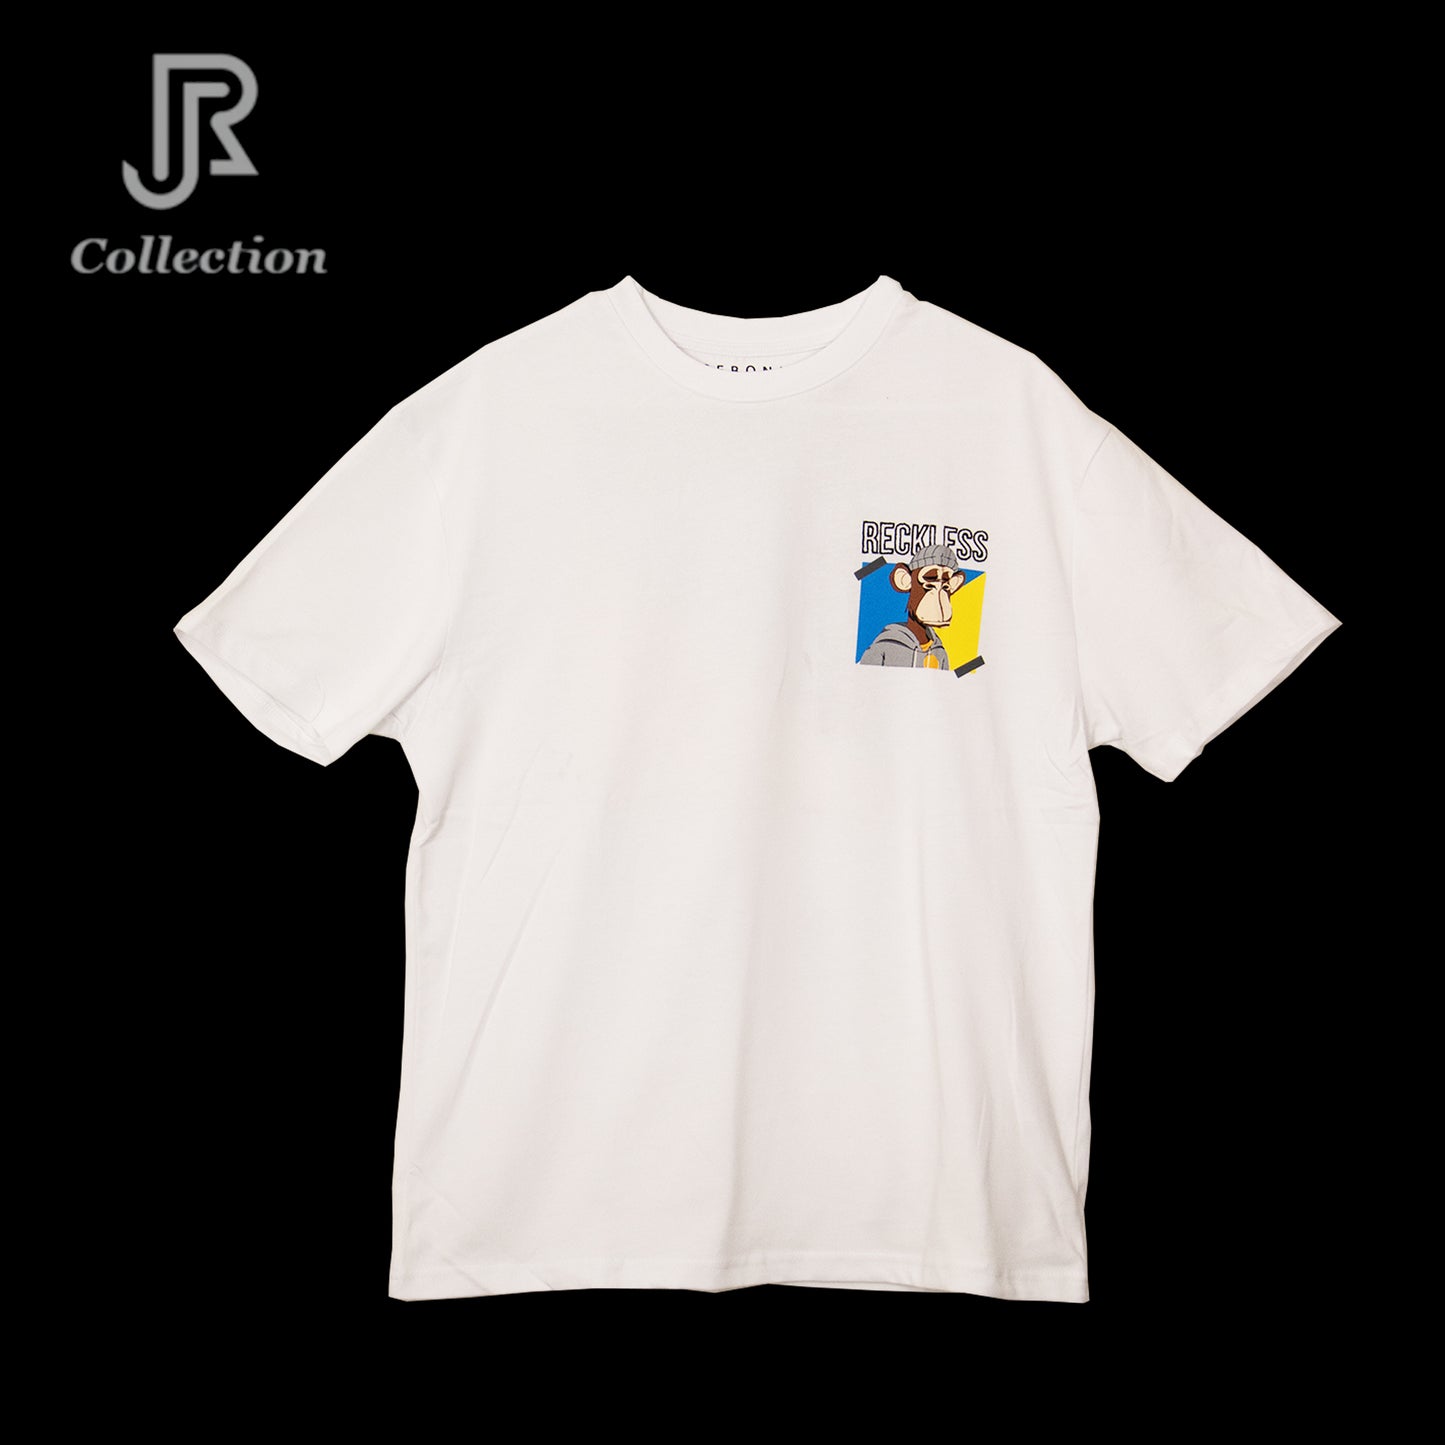 "Oversized High-Quality T-Shirt (% 100 Eco-Friendly Cotton), Durable, Fashionable and Stylish, Unisex, Designed by RJ Collection"